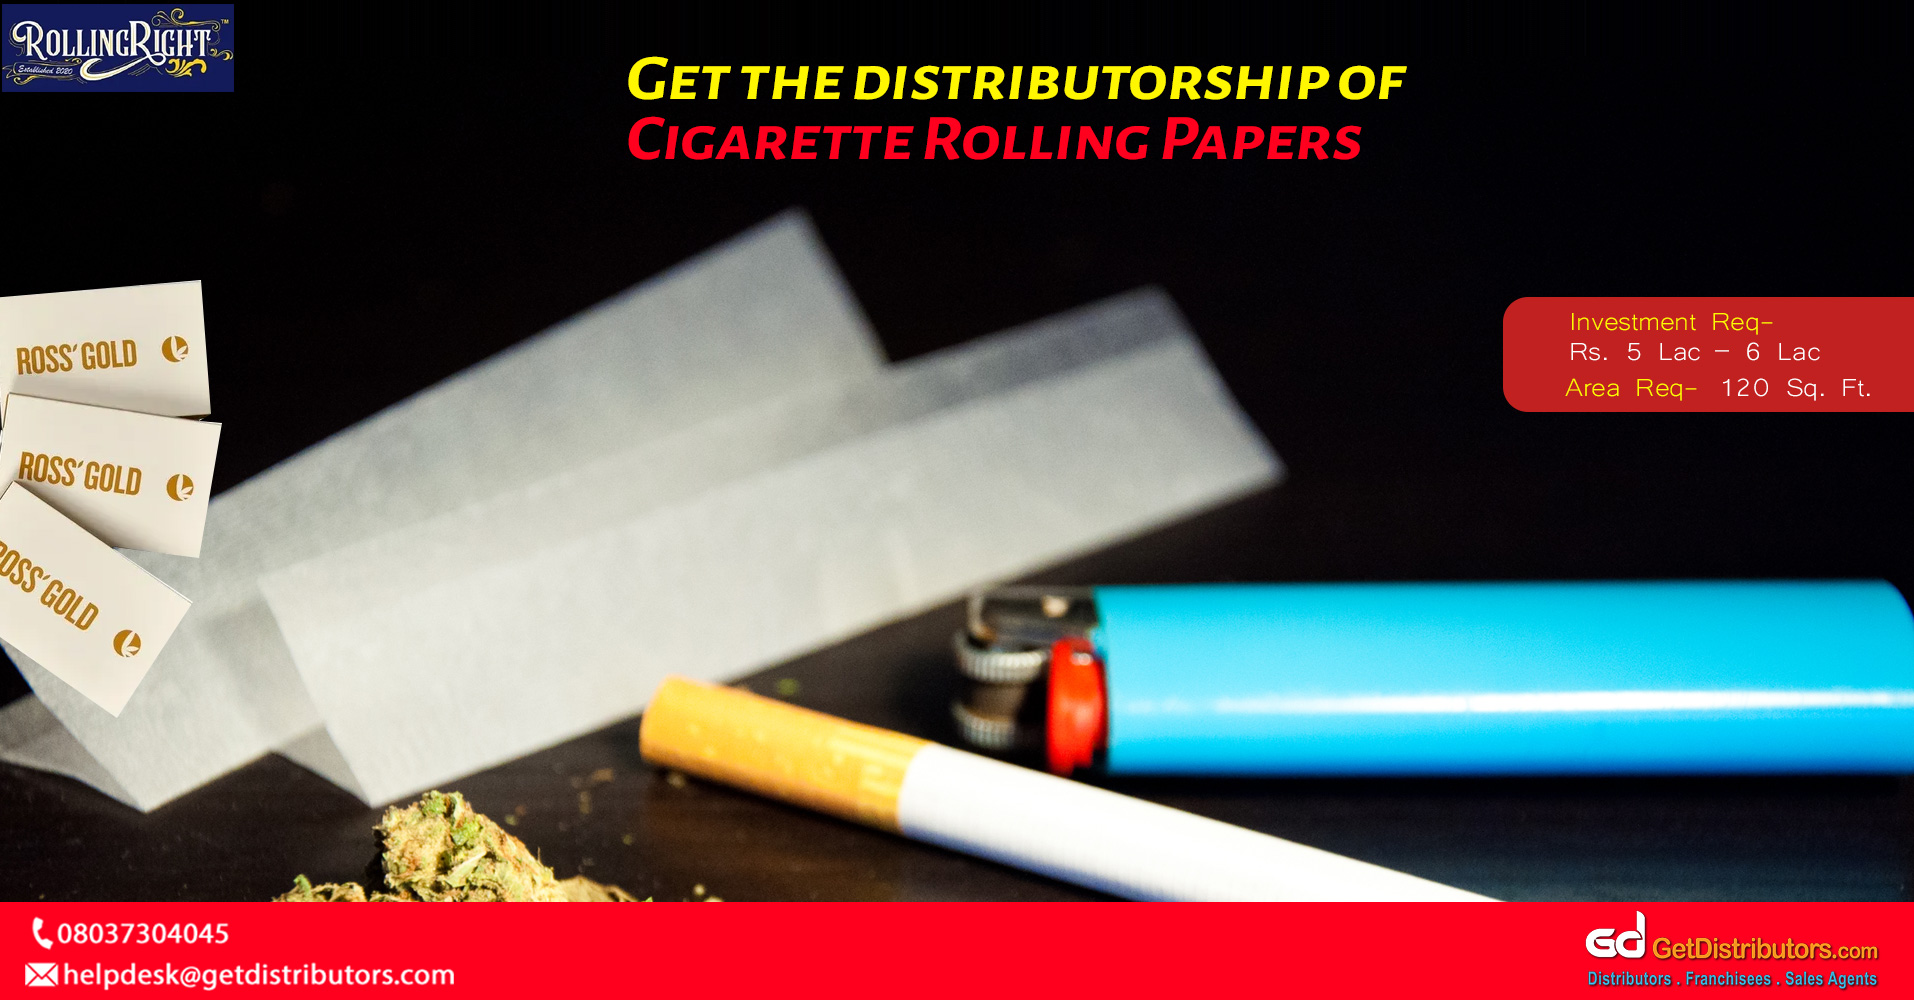 Cigarette rolling papers offered at cost-effective rates